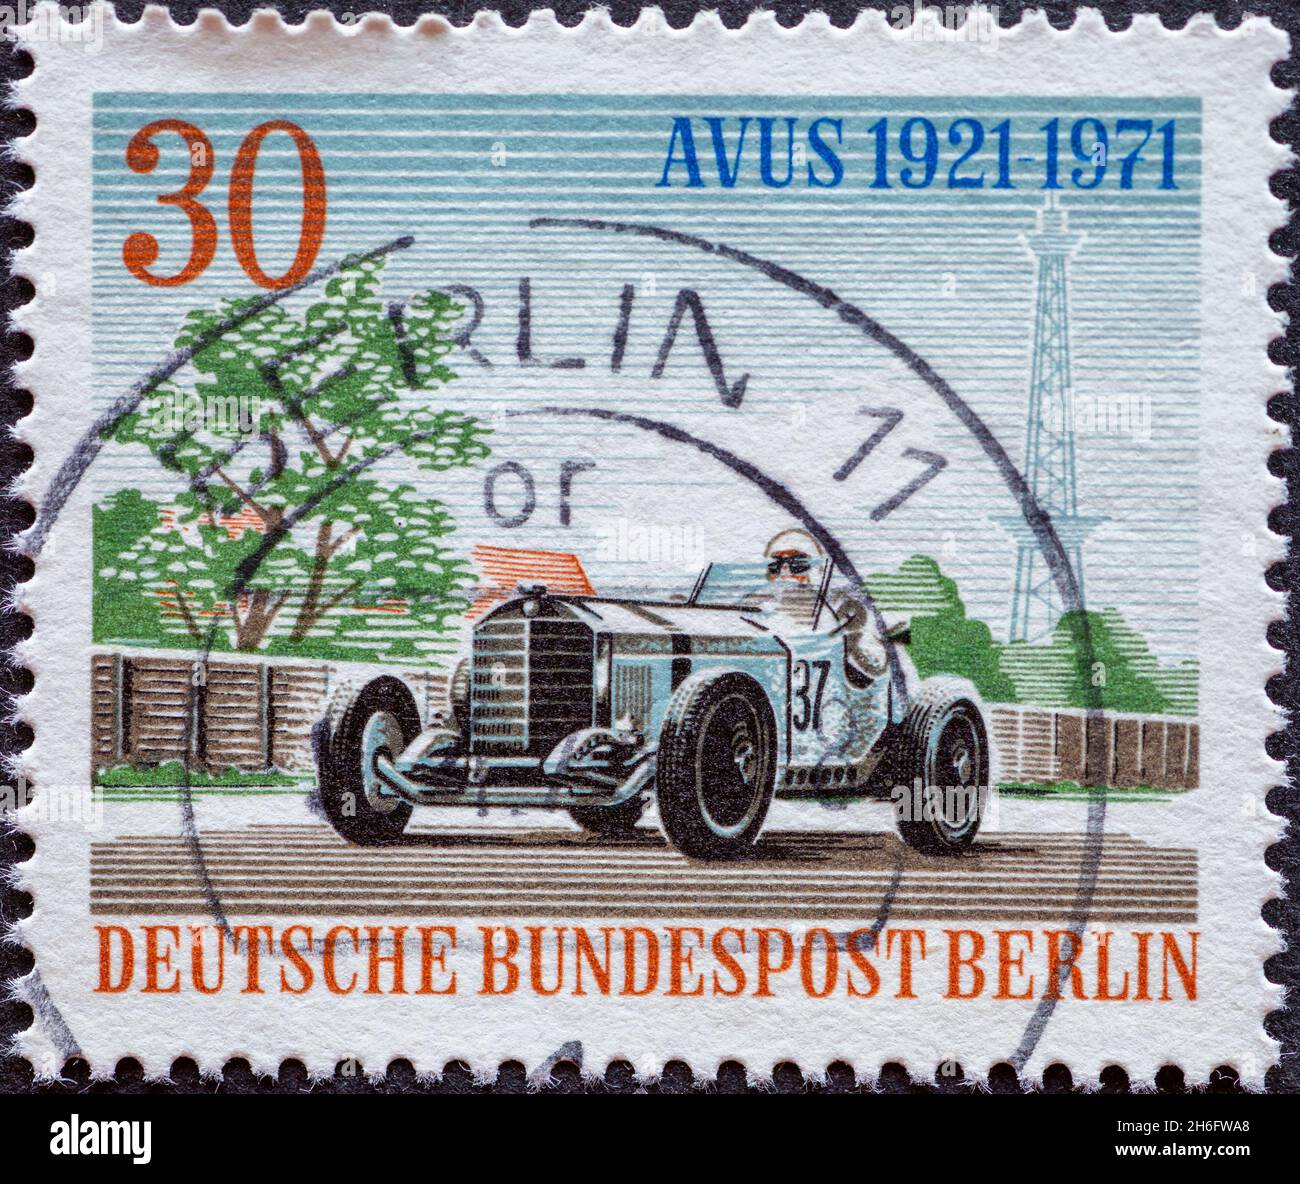 GERMANY, Berlin - CIRCA 1971 a postage stamp from Germany, Berlin showing Racing car for the 50th anniversary of the Avus race: Mercedes Benz Silberpf Stock Photo